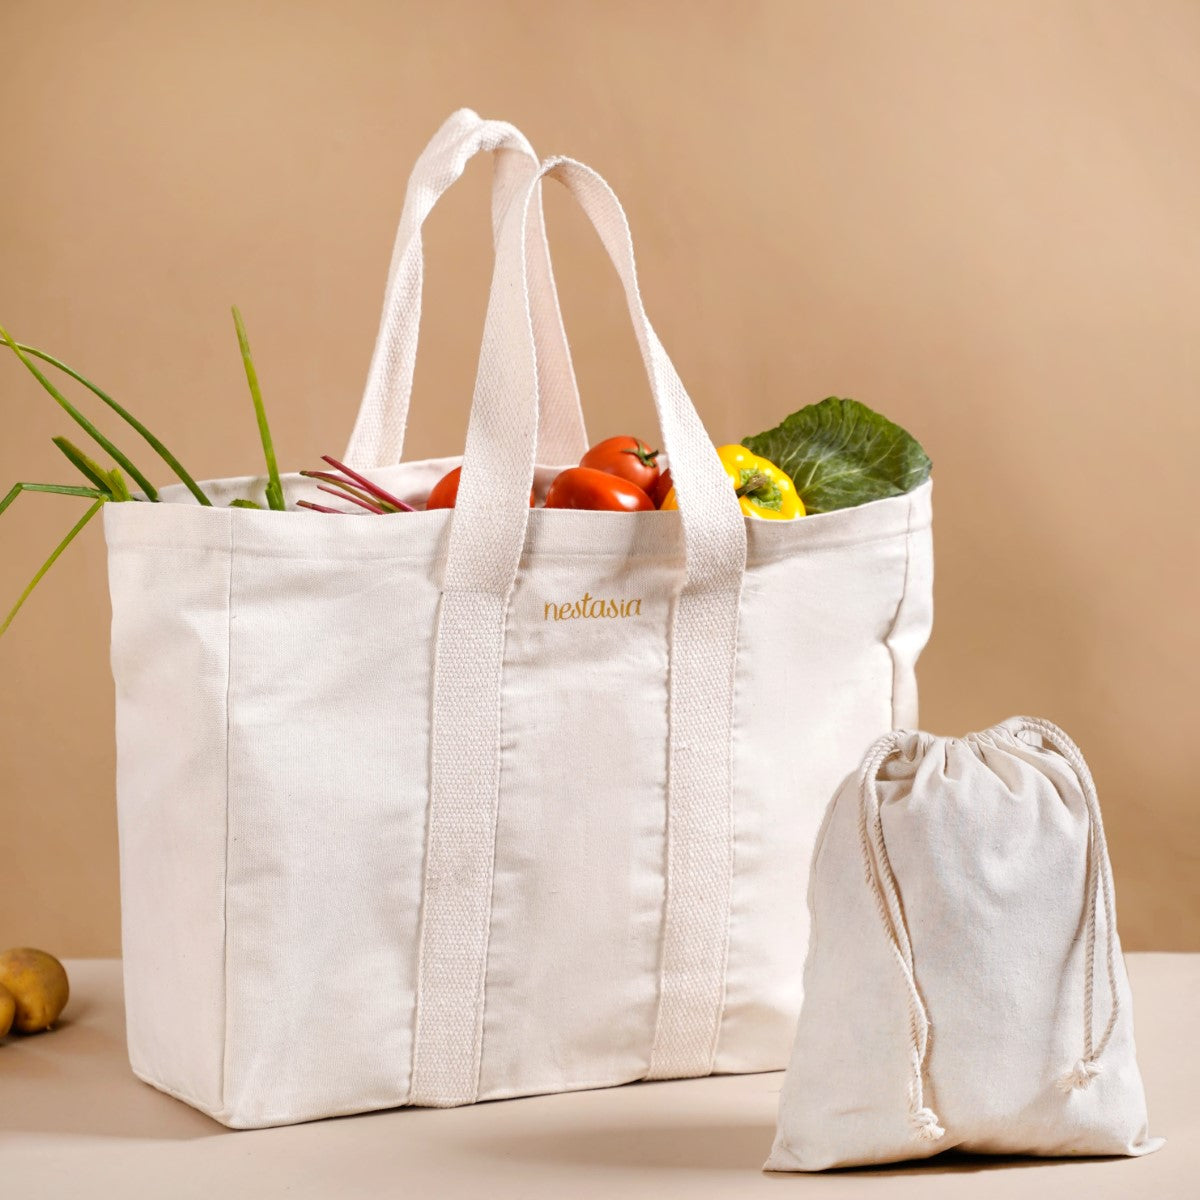 Canvas Tote Bags Heavy Duty Reusable Cotton Grocery Shopping Bags with  Bottom Gusset for DIY Crafts Gift Bag Wedding 4pcs,12.2